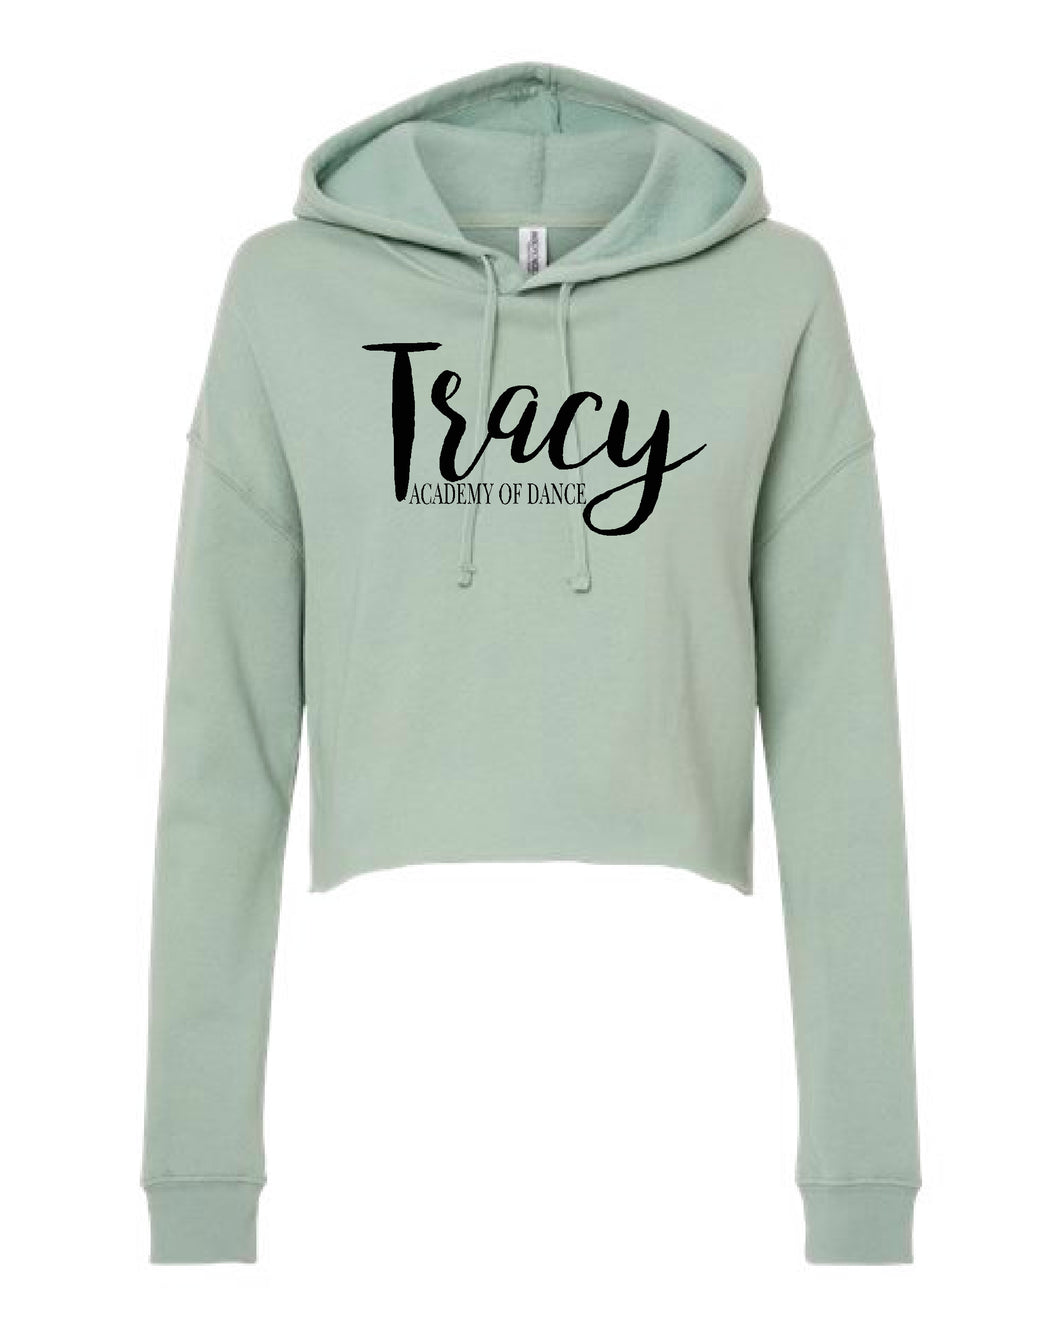 Tracy Academy of Dance Independent Trading Co. Cropped Sweatshirt- Sage (Adult Only)